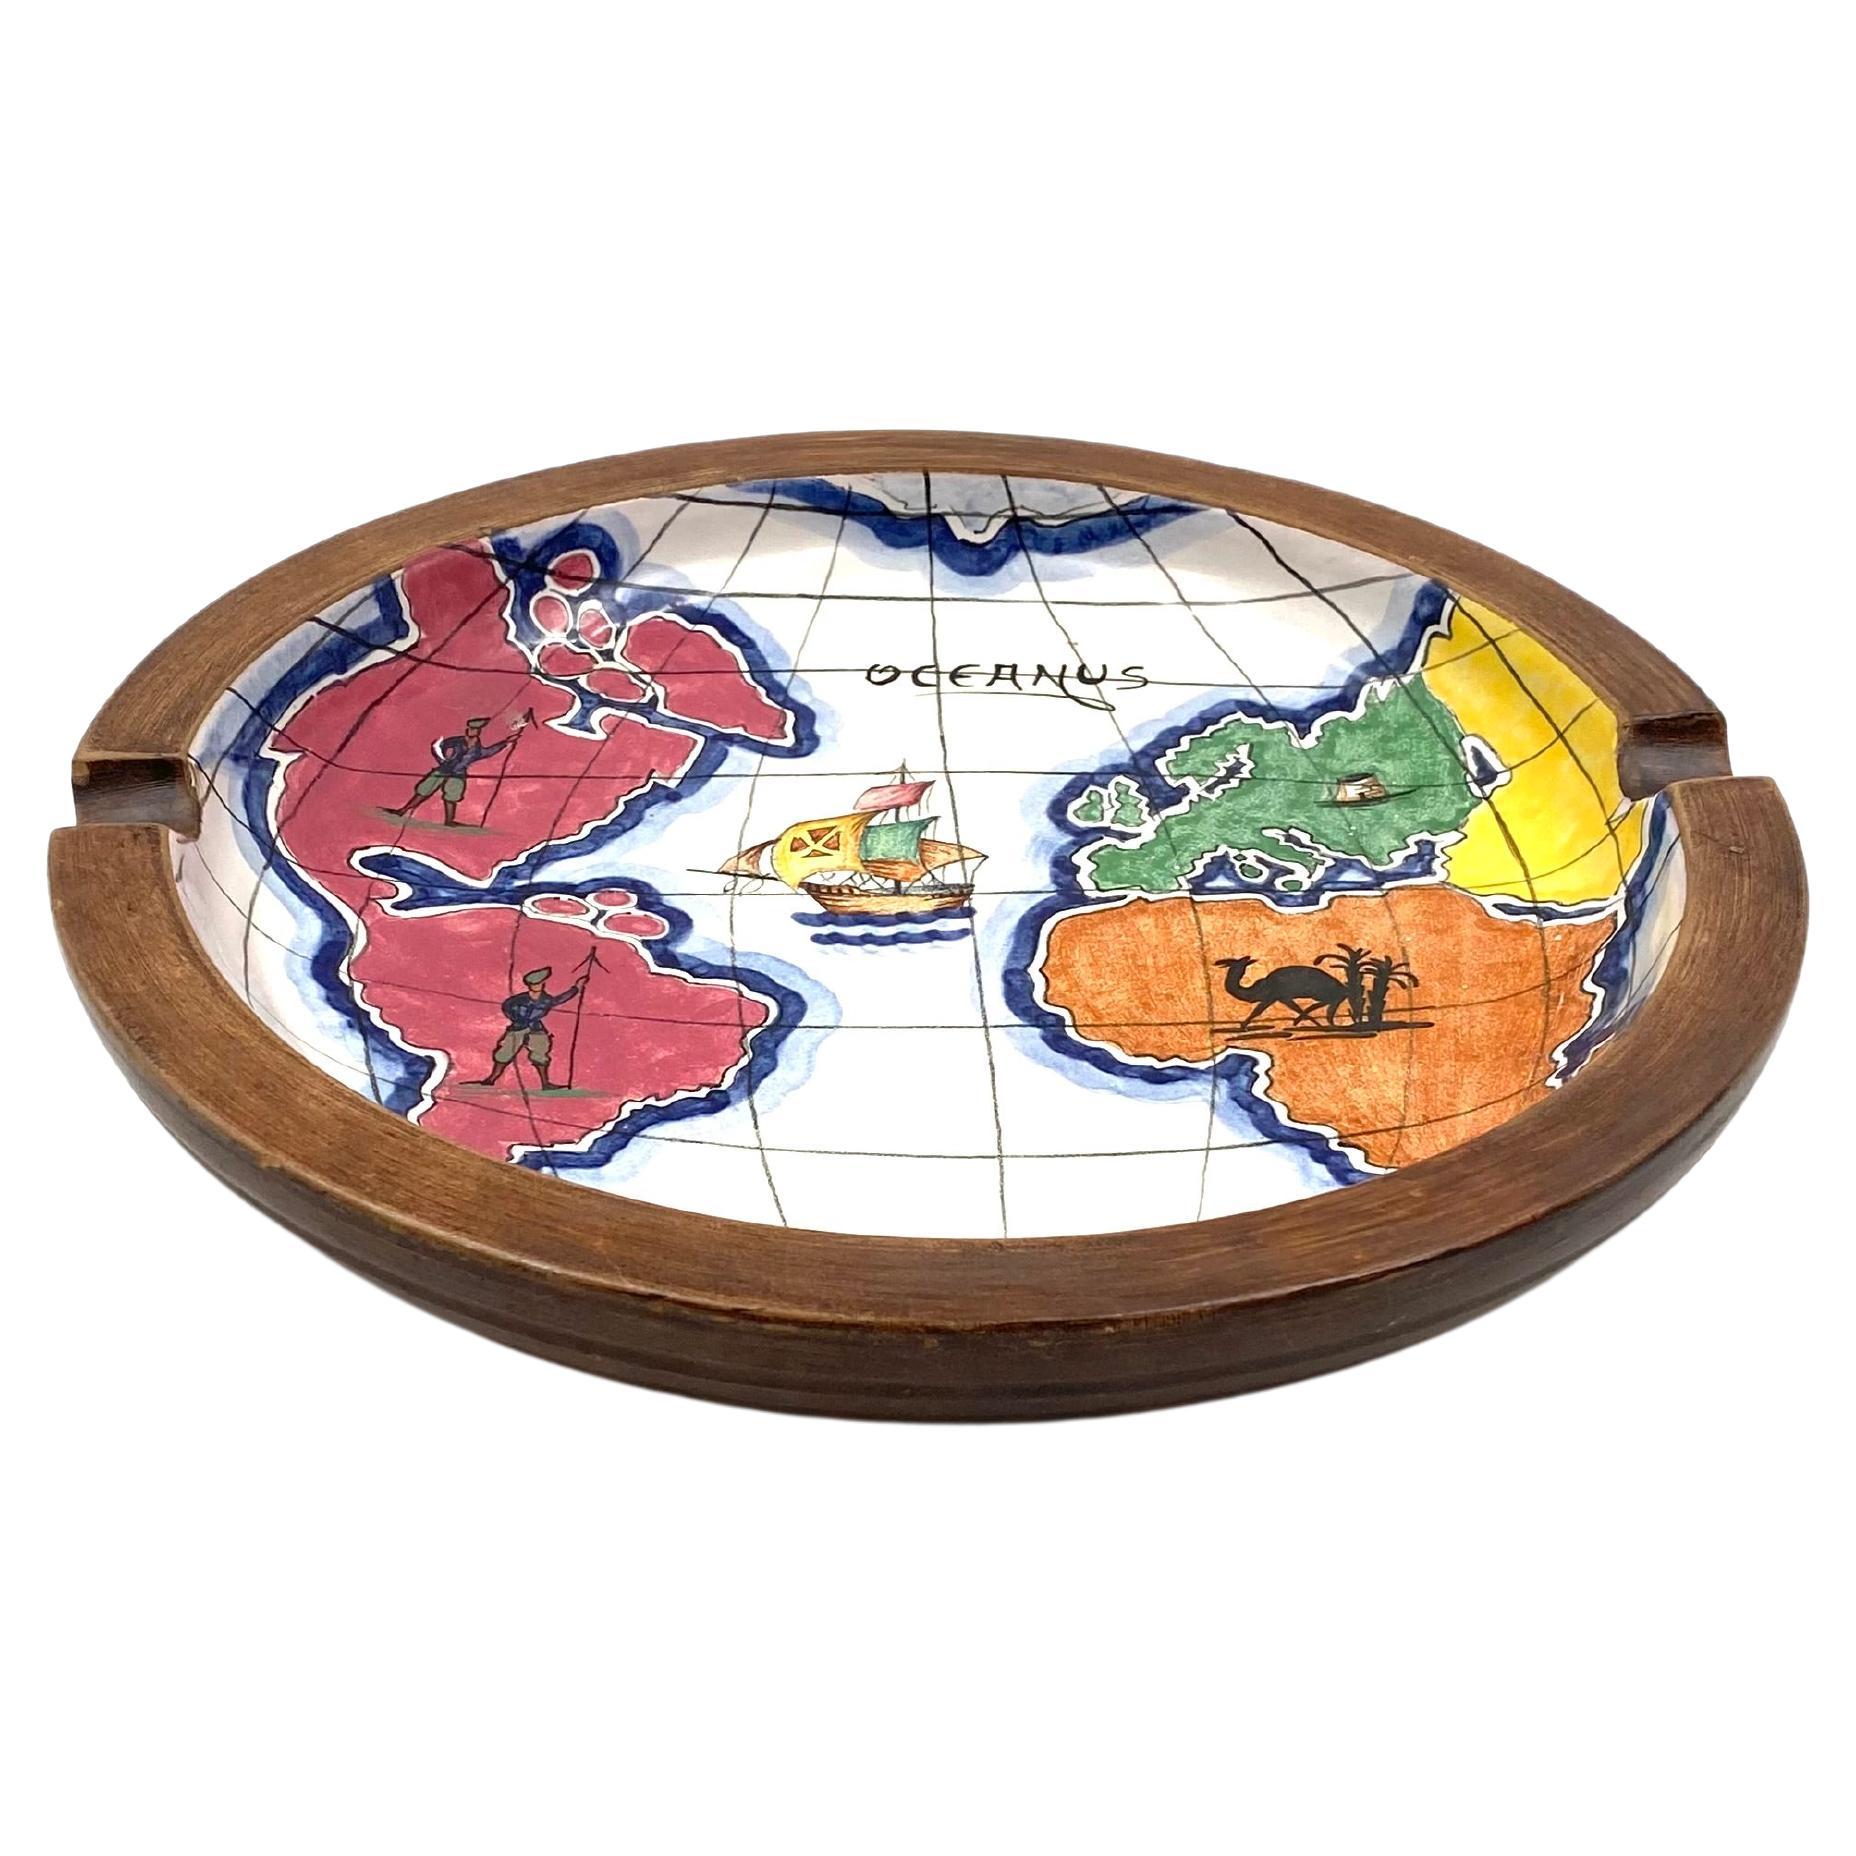 Polychrome Ceramic World Map Catchall / Ashtray, Zaccagnini, Italy, 1940s For Sale